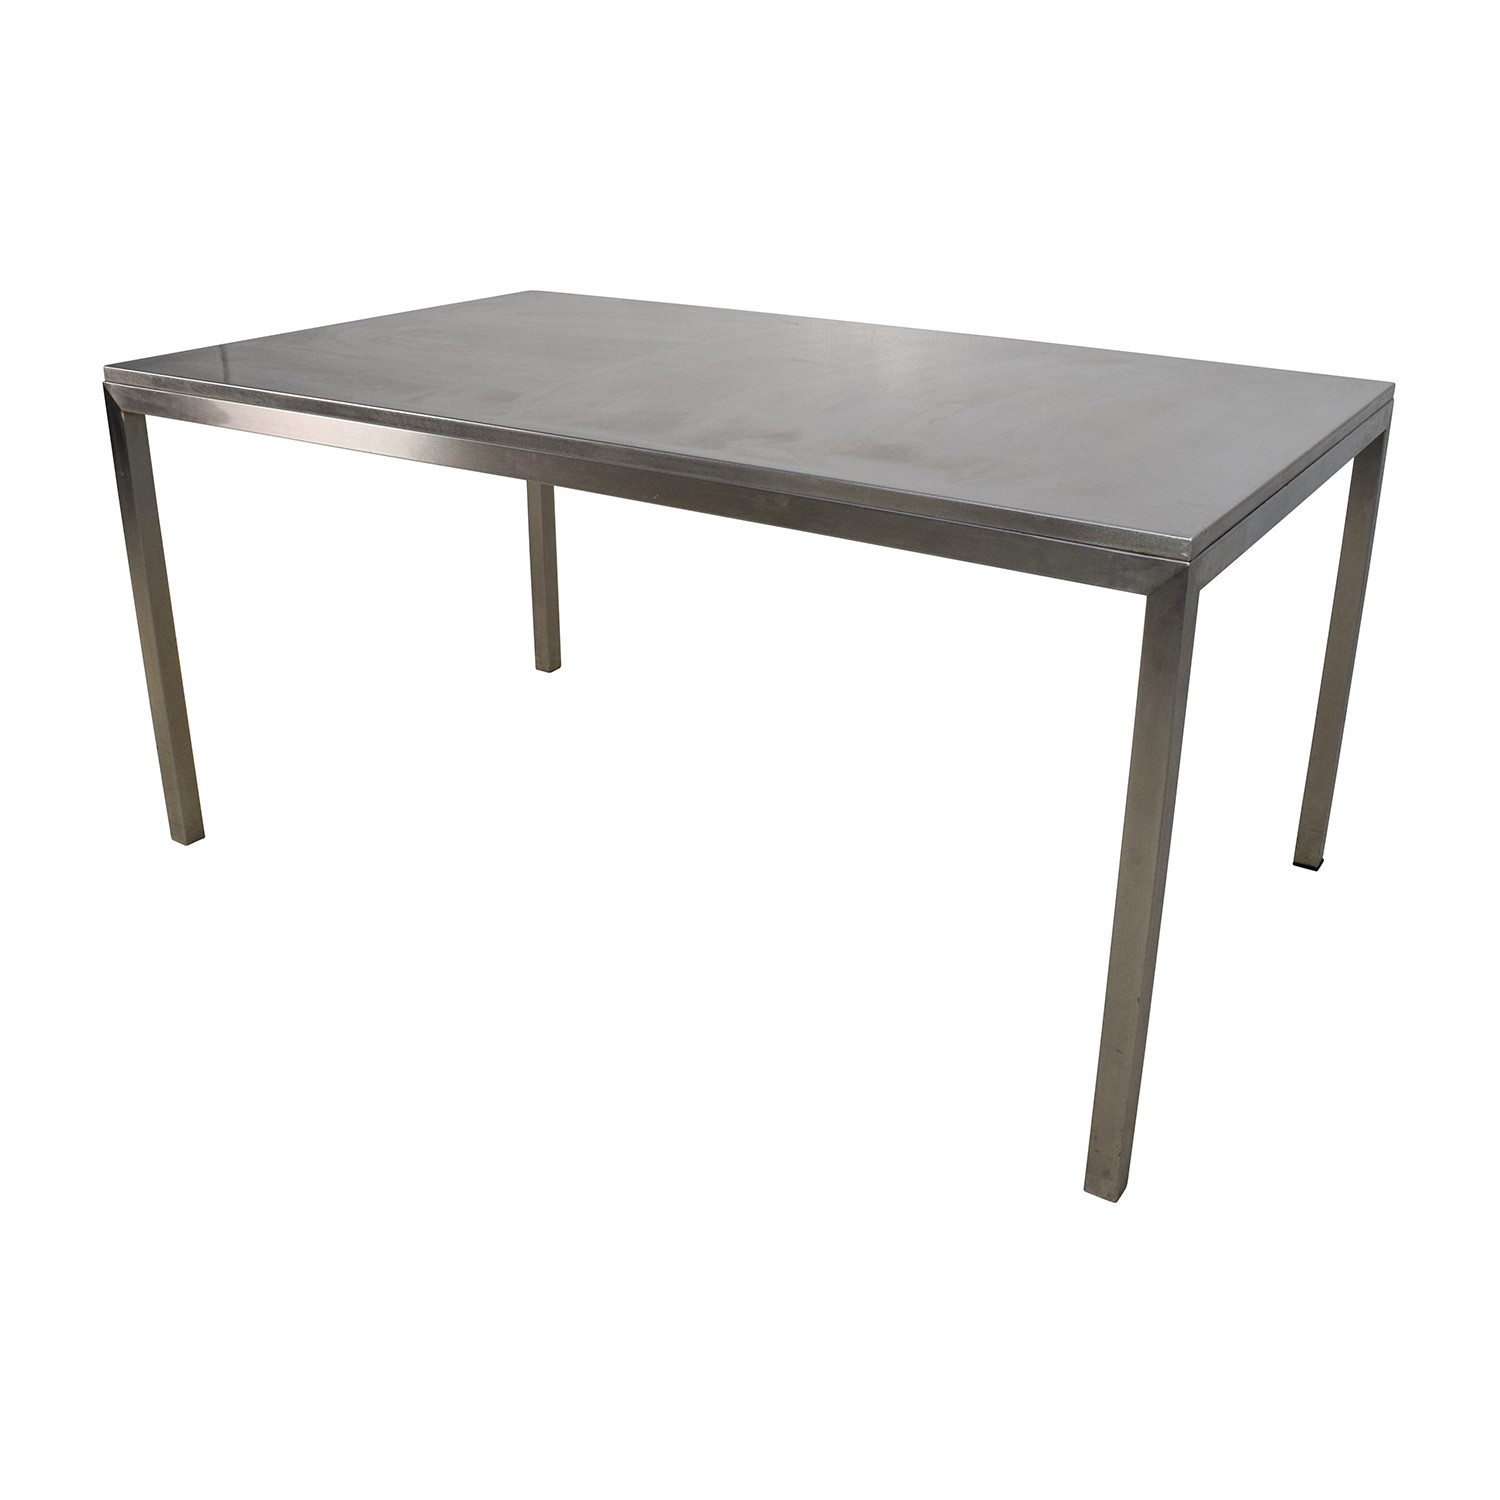 Best ideas about Room And Board Dining Table
. Save or Pin OFF Room and Board Room & Board Portica Stainless Now.